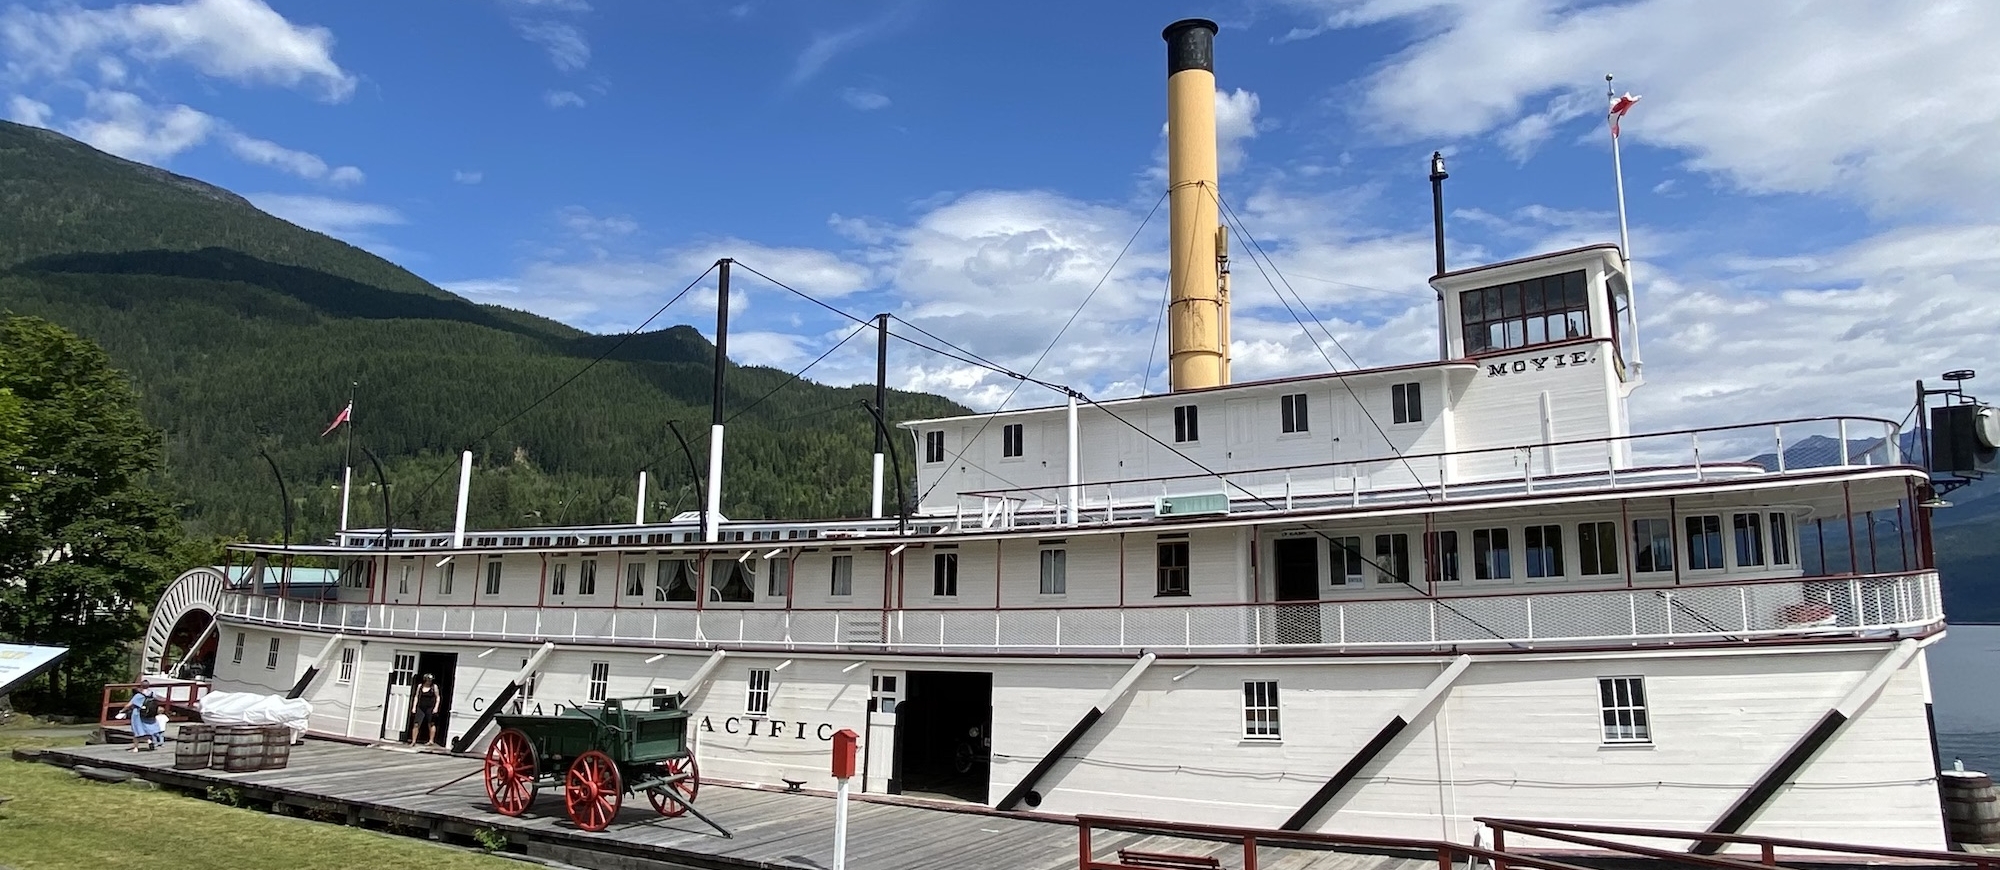 the SS Moyie and Visitor Centre sits with mountains in the background in Kaslo, BC